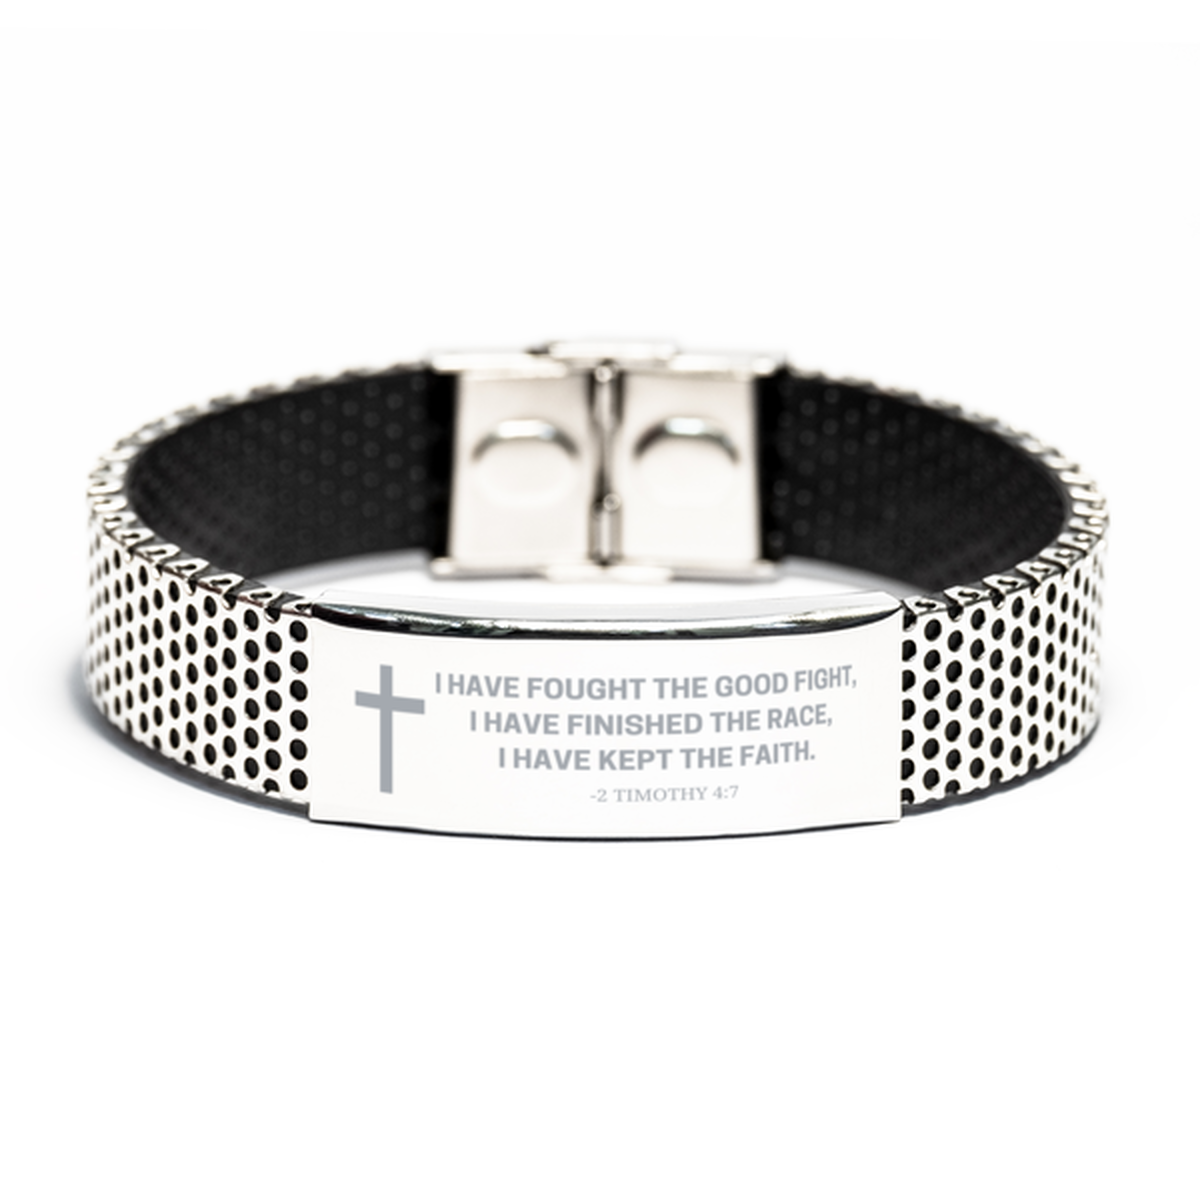 Baptism Gifts For Teenage Boys Girls, Christian Bible Verse Stainless Steel Bracelet, I have fought the good fight, Catholic Confirmation Gifts for Son, Godson, Grandson, Nephew